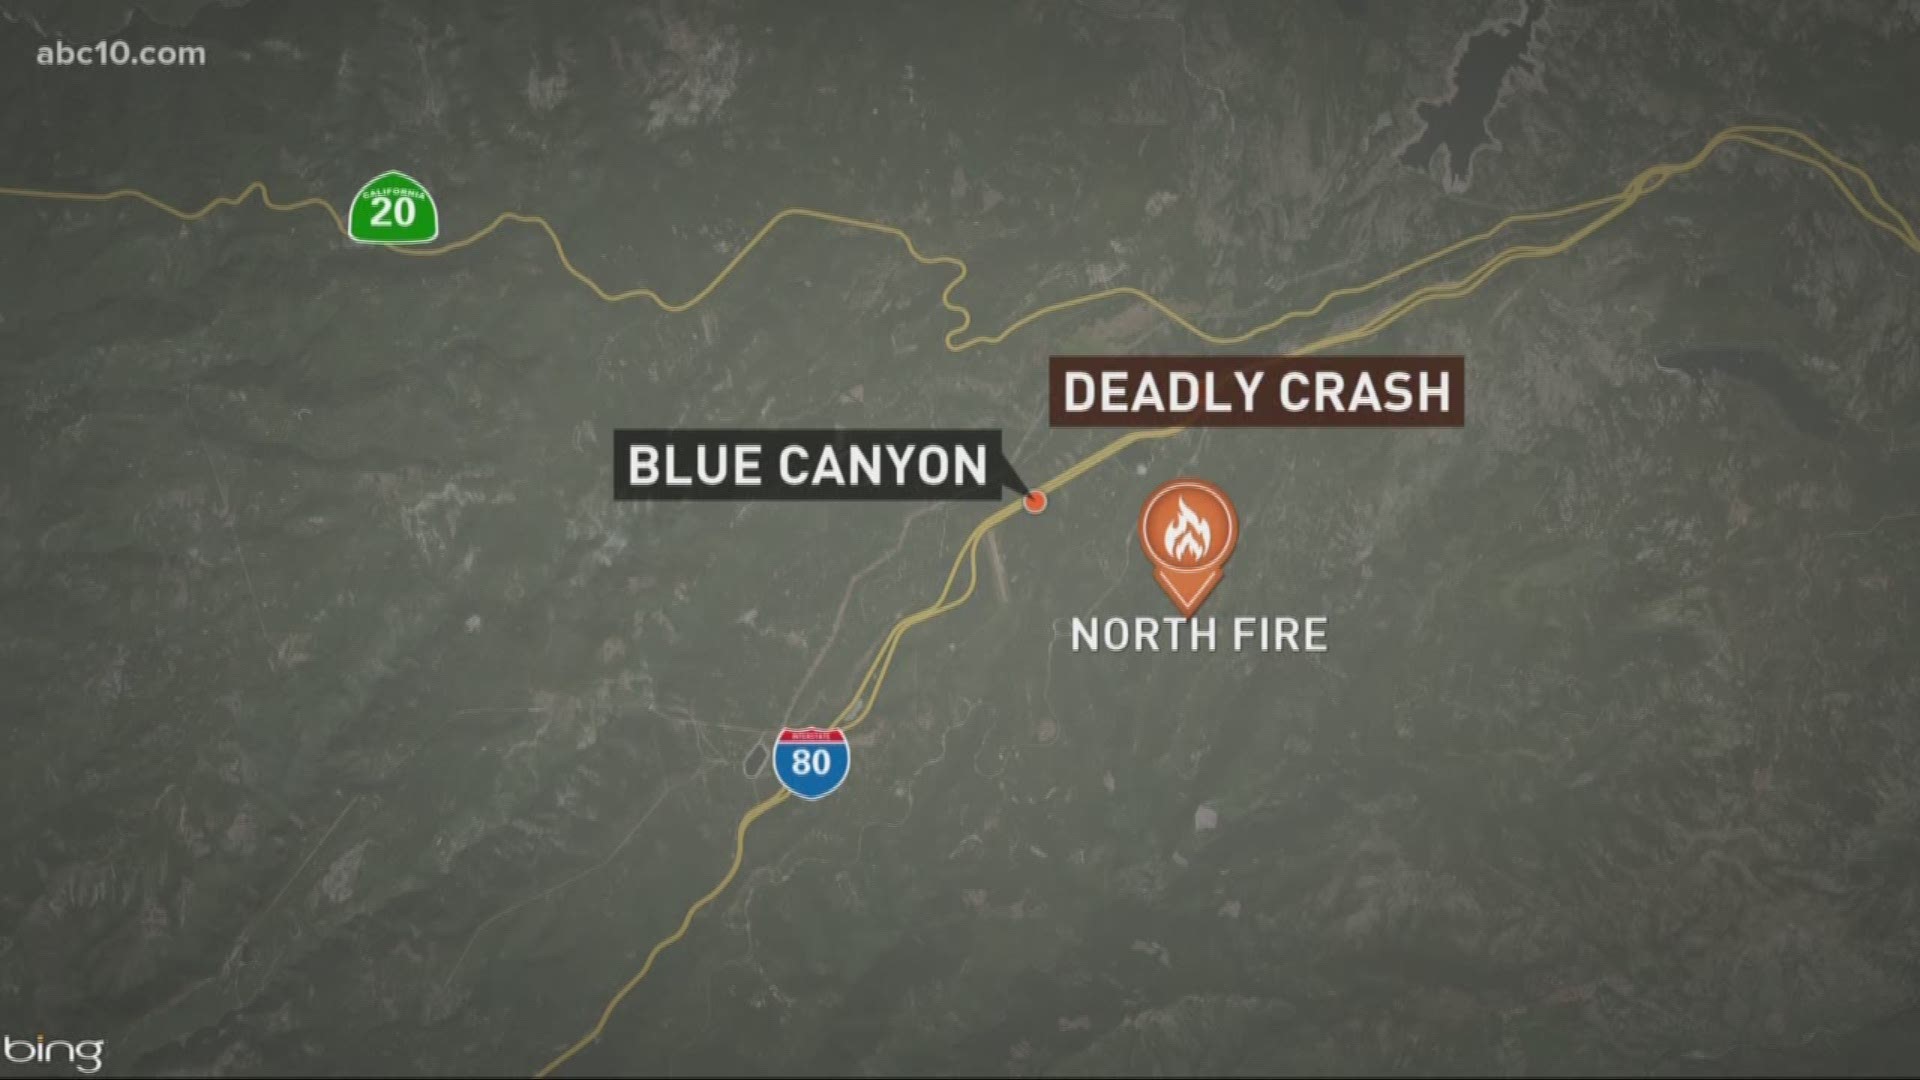 A bulldozer operator, working as a private contractor on the North Fire, died in a car crash on westbound Interstate 80, just to the east of Blue Canyon, California, Tuesday.